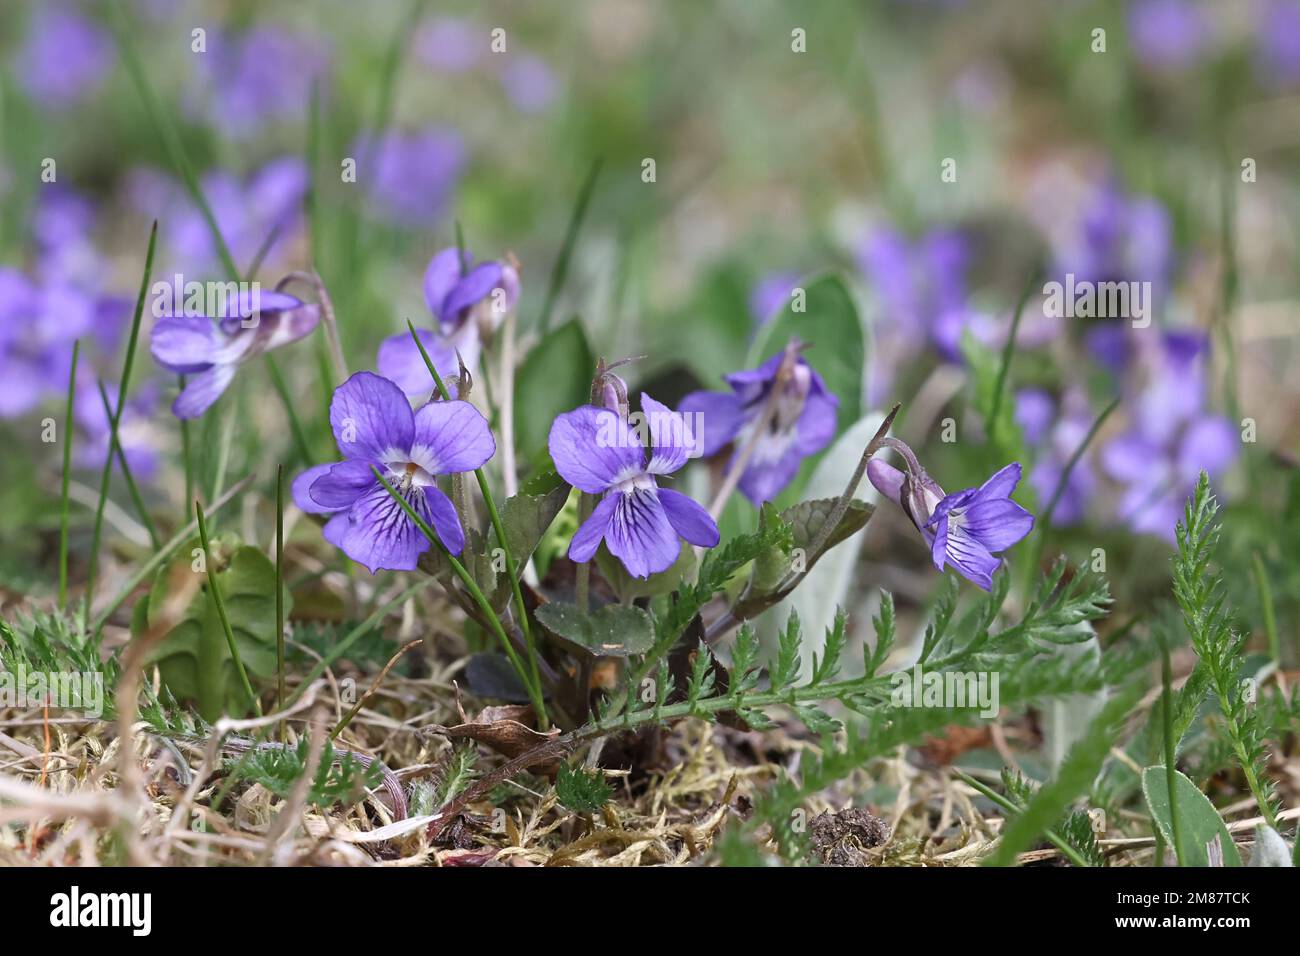 Viola rupestris, commonly known as teesdale violet, wild spring flower from Finland Stock Photo